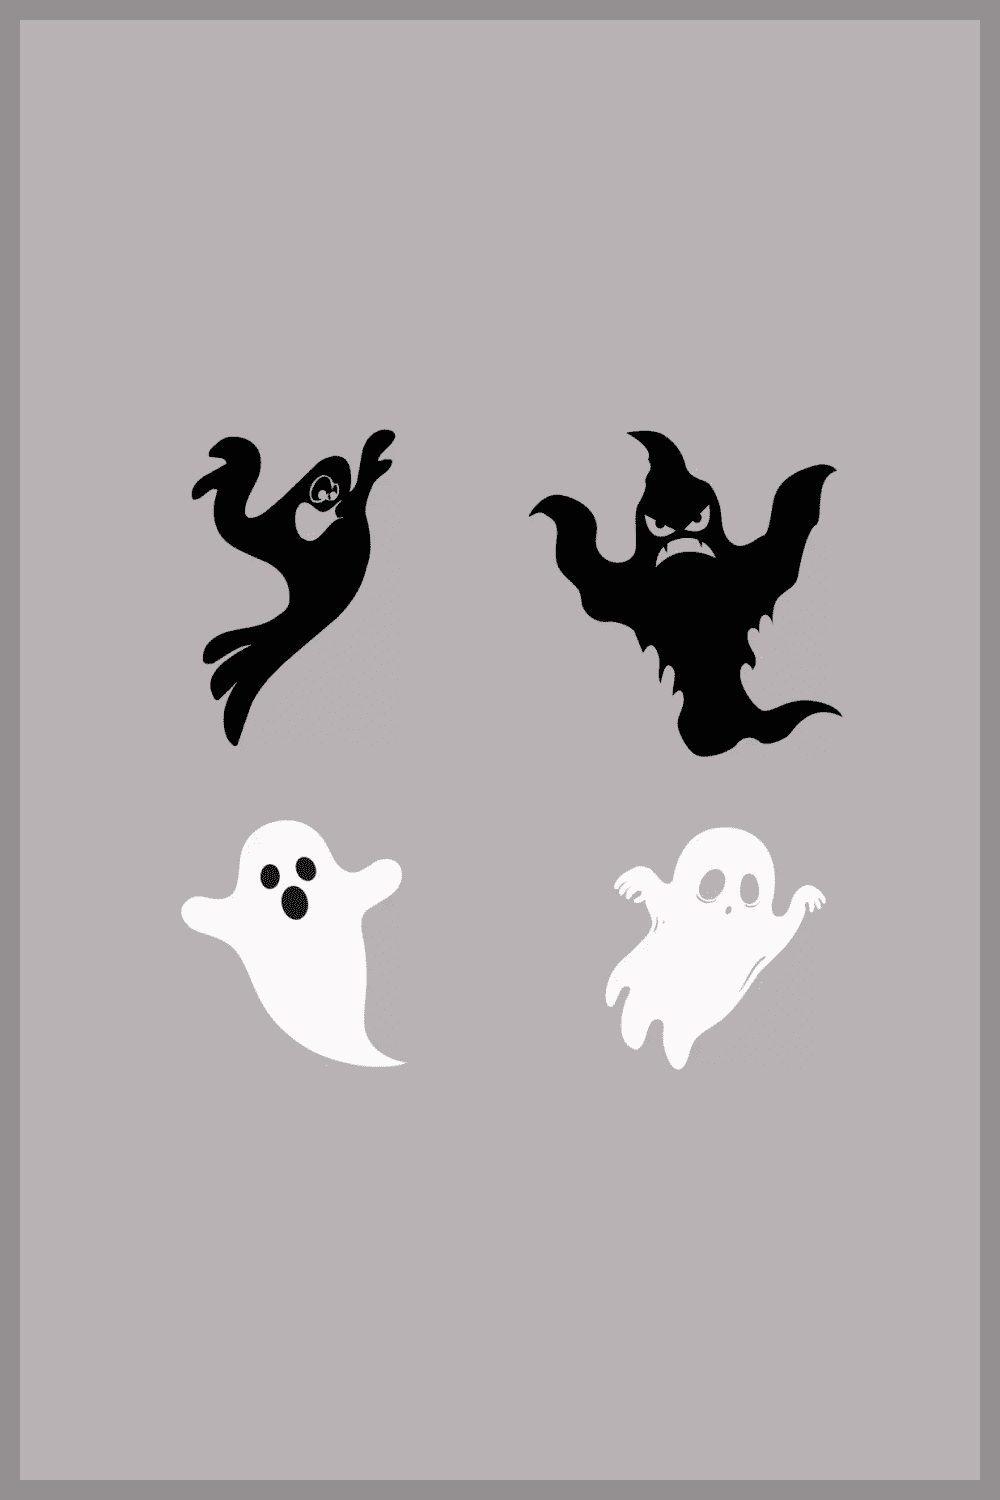 Collage of images of ghosts in black and white.